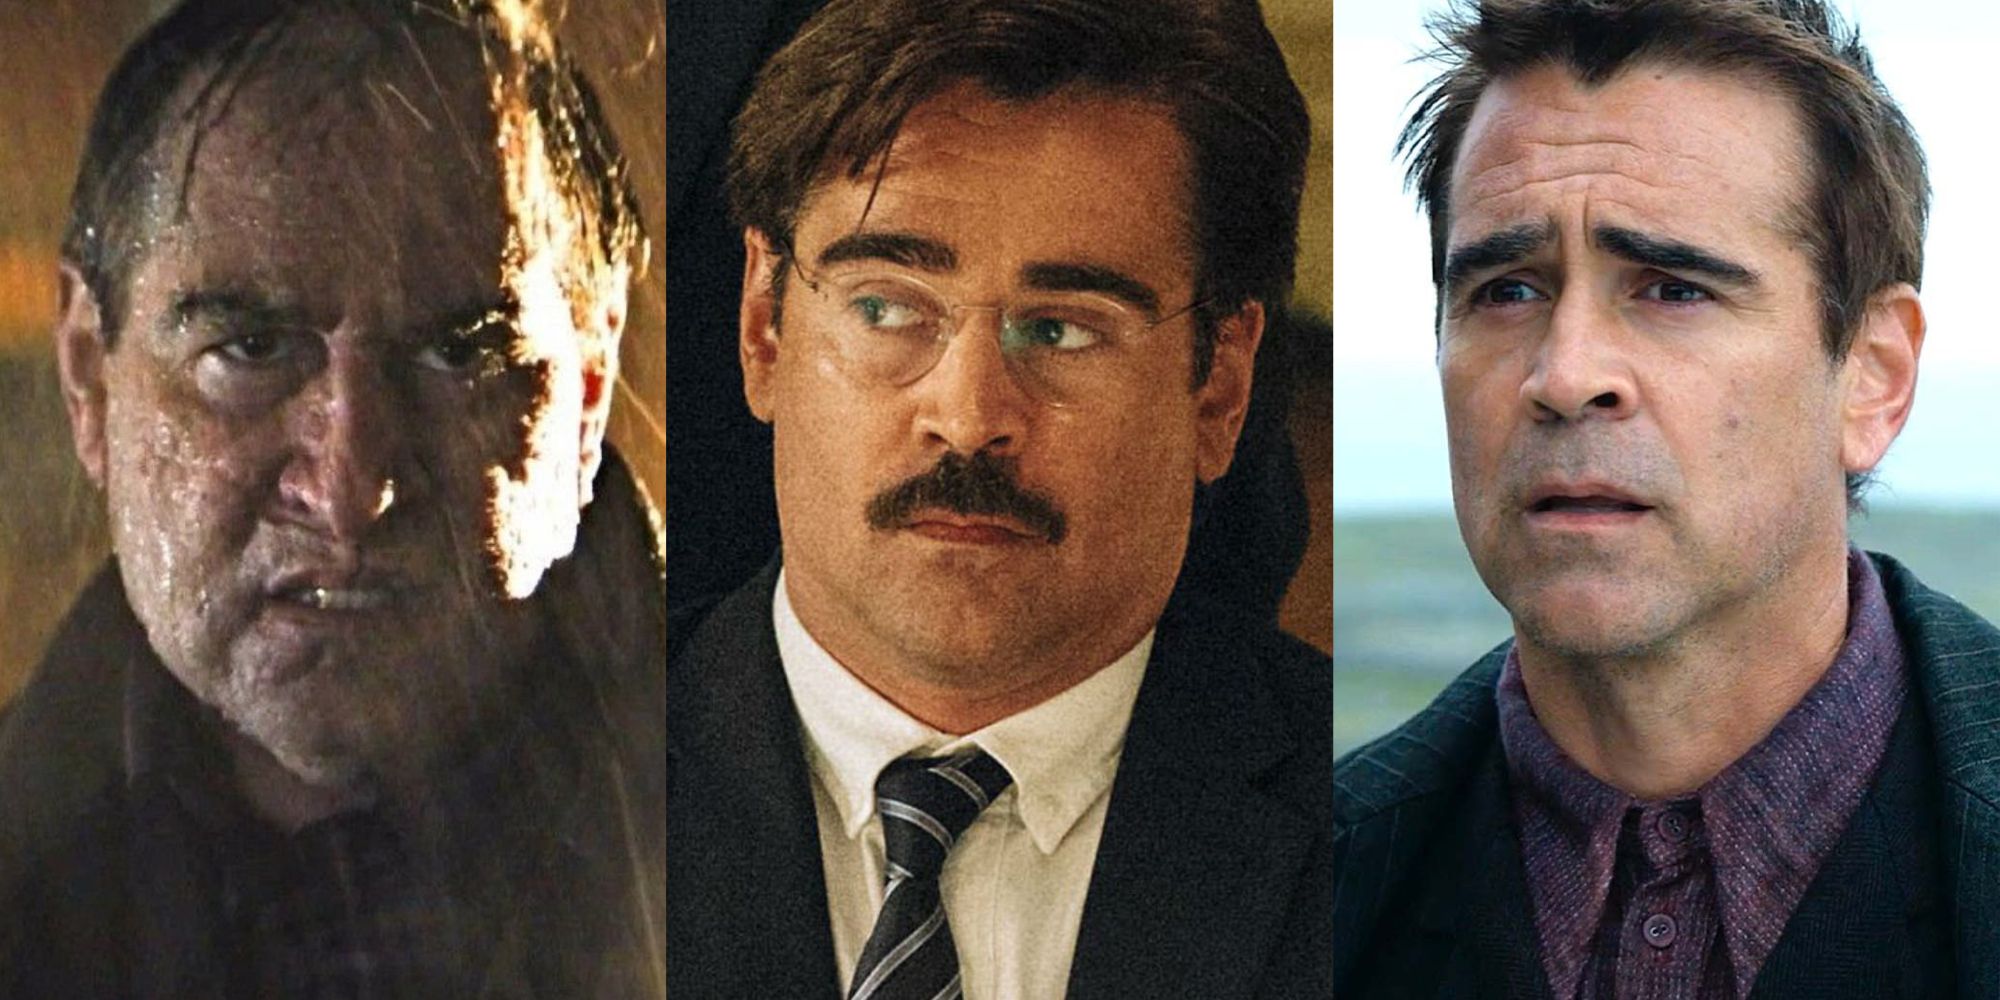 15 Best Colin Farrell Movies (According To Rotten Tomatoes)